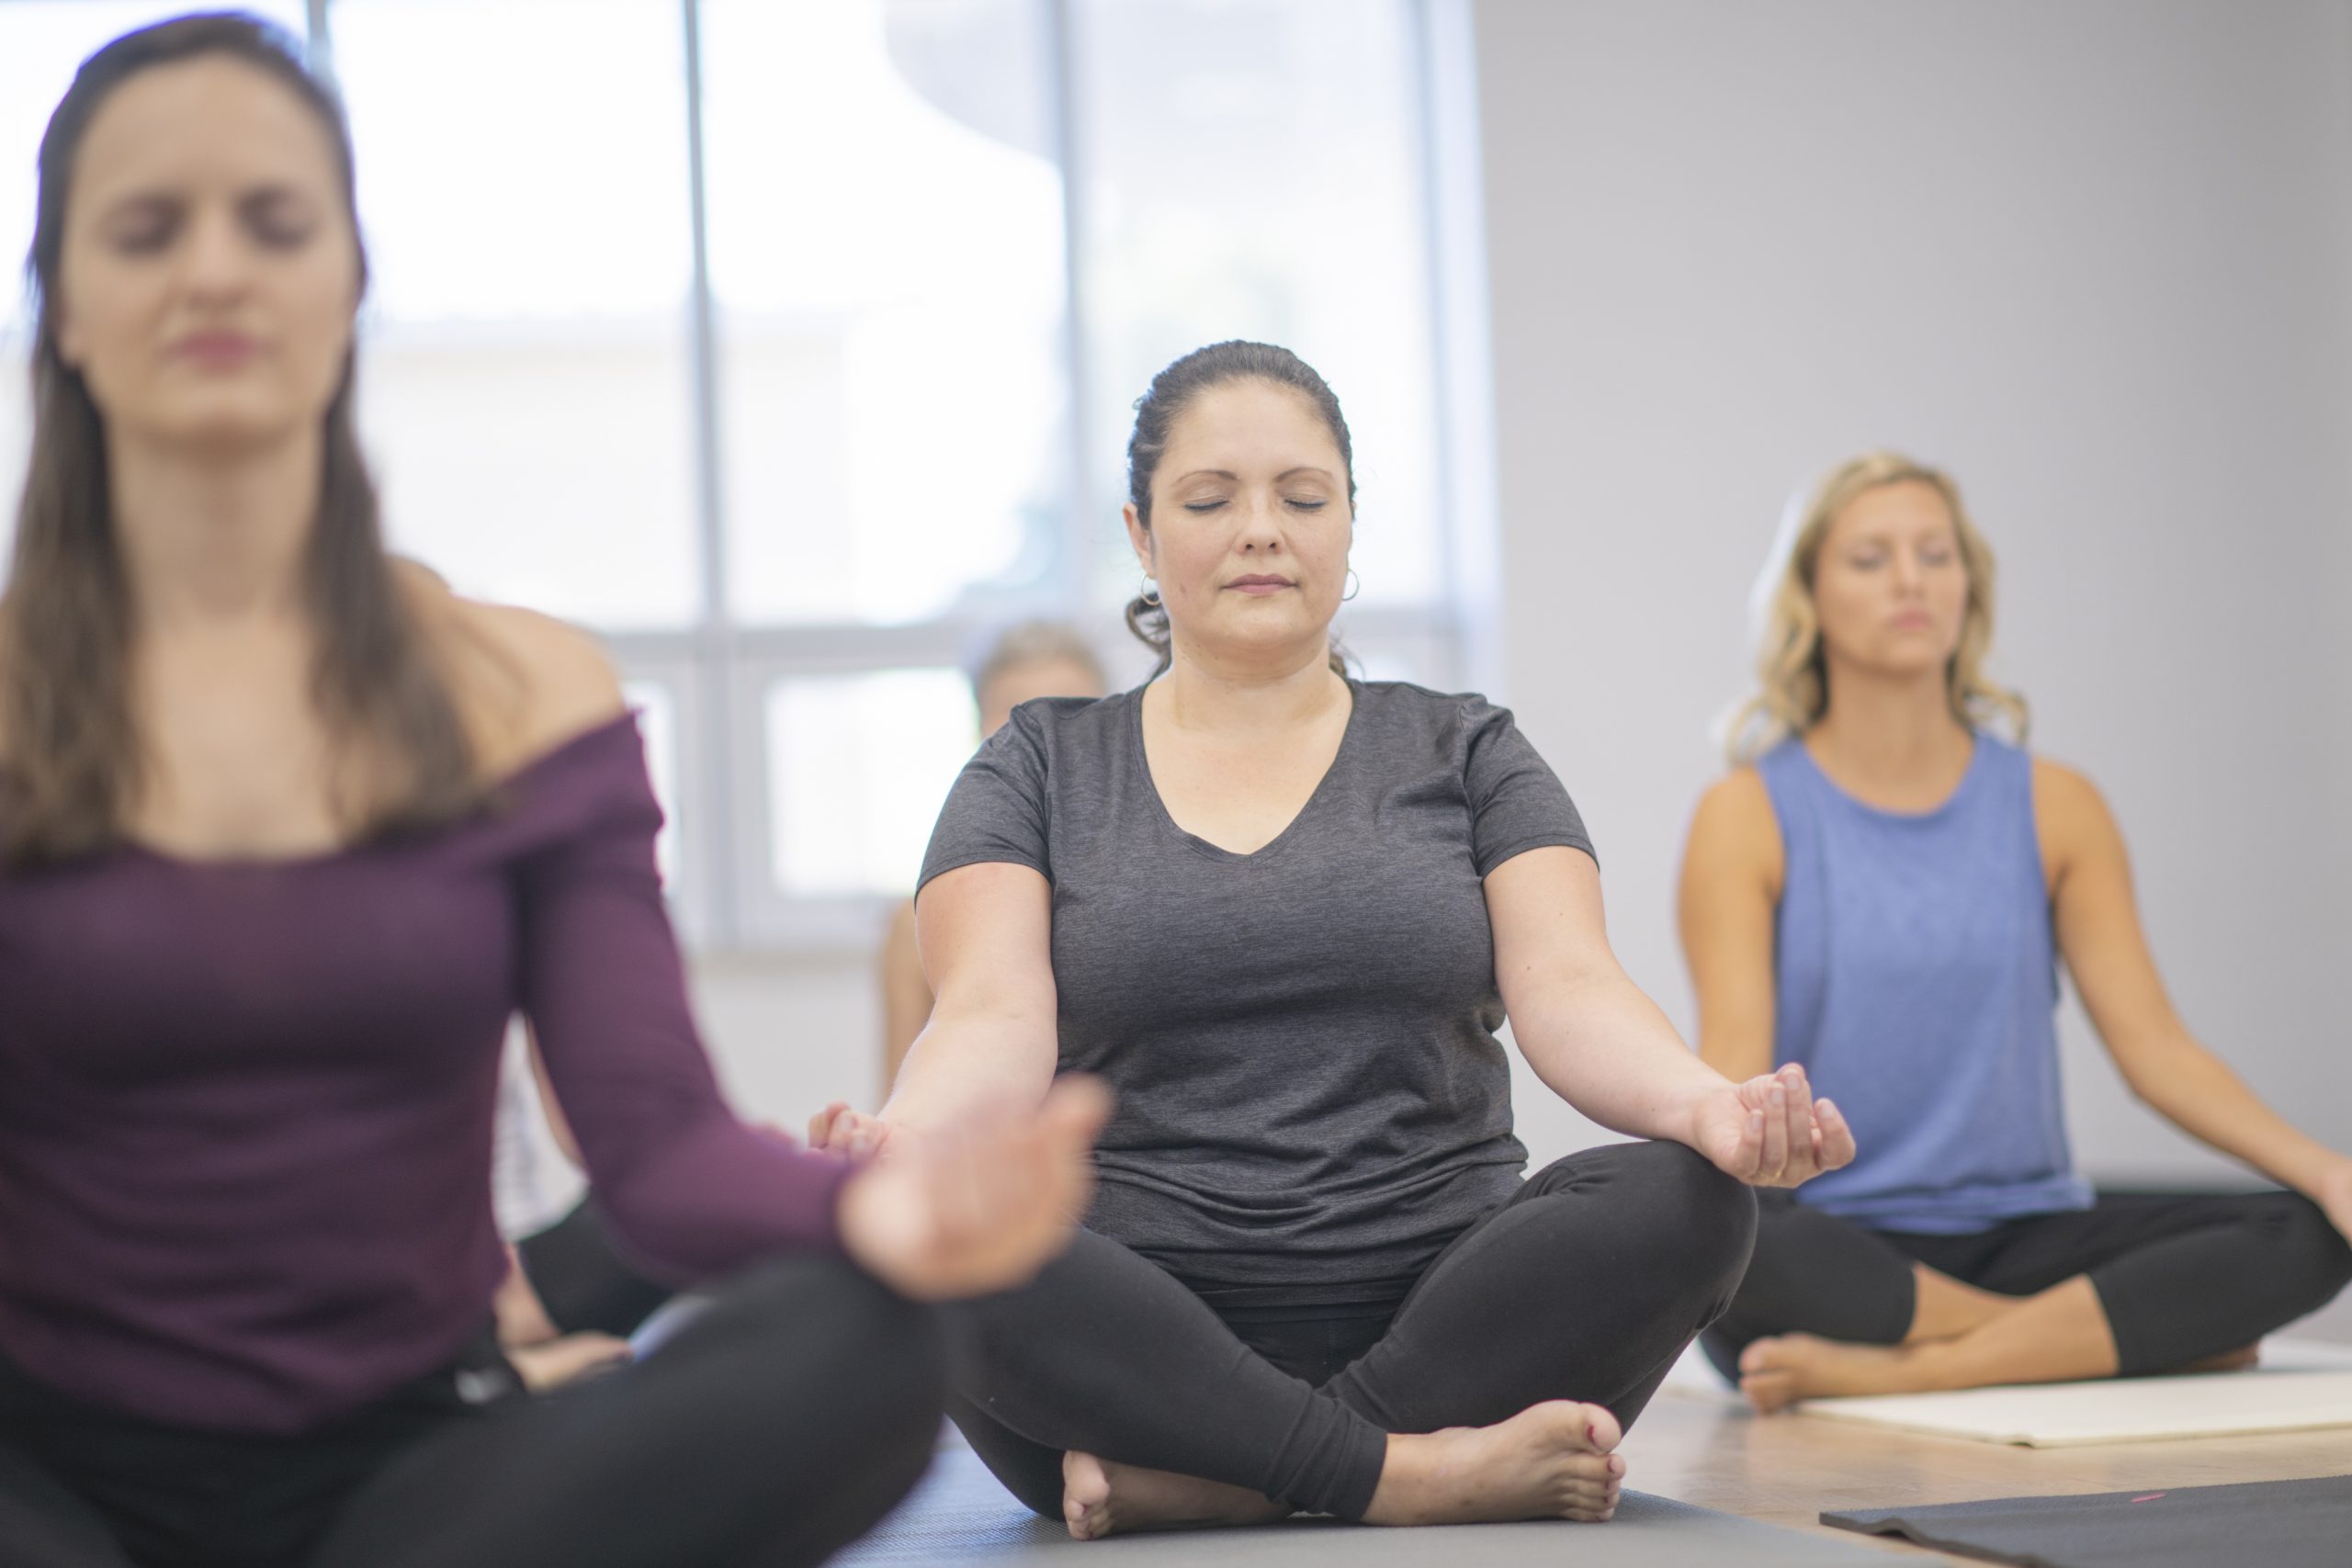 Group of women in yoga class with eyes closed, cross-legged and hands on knees.